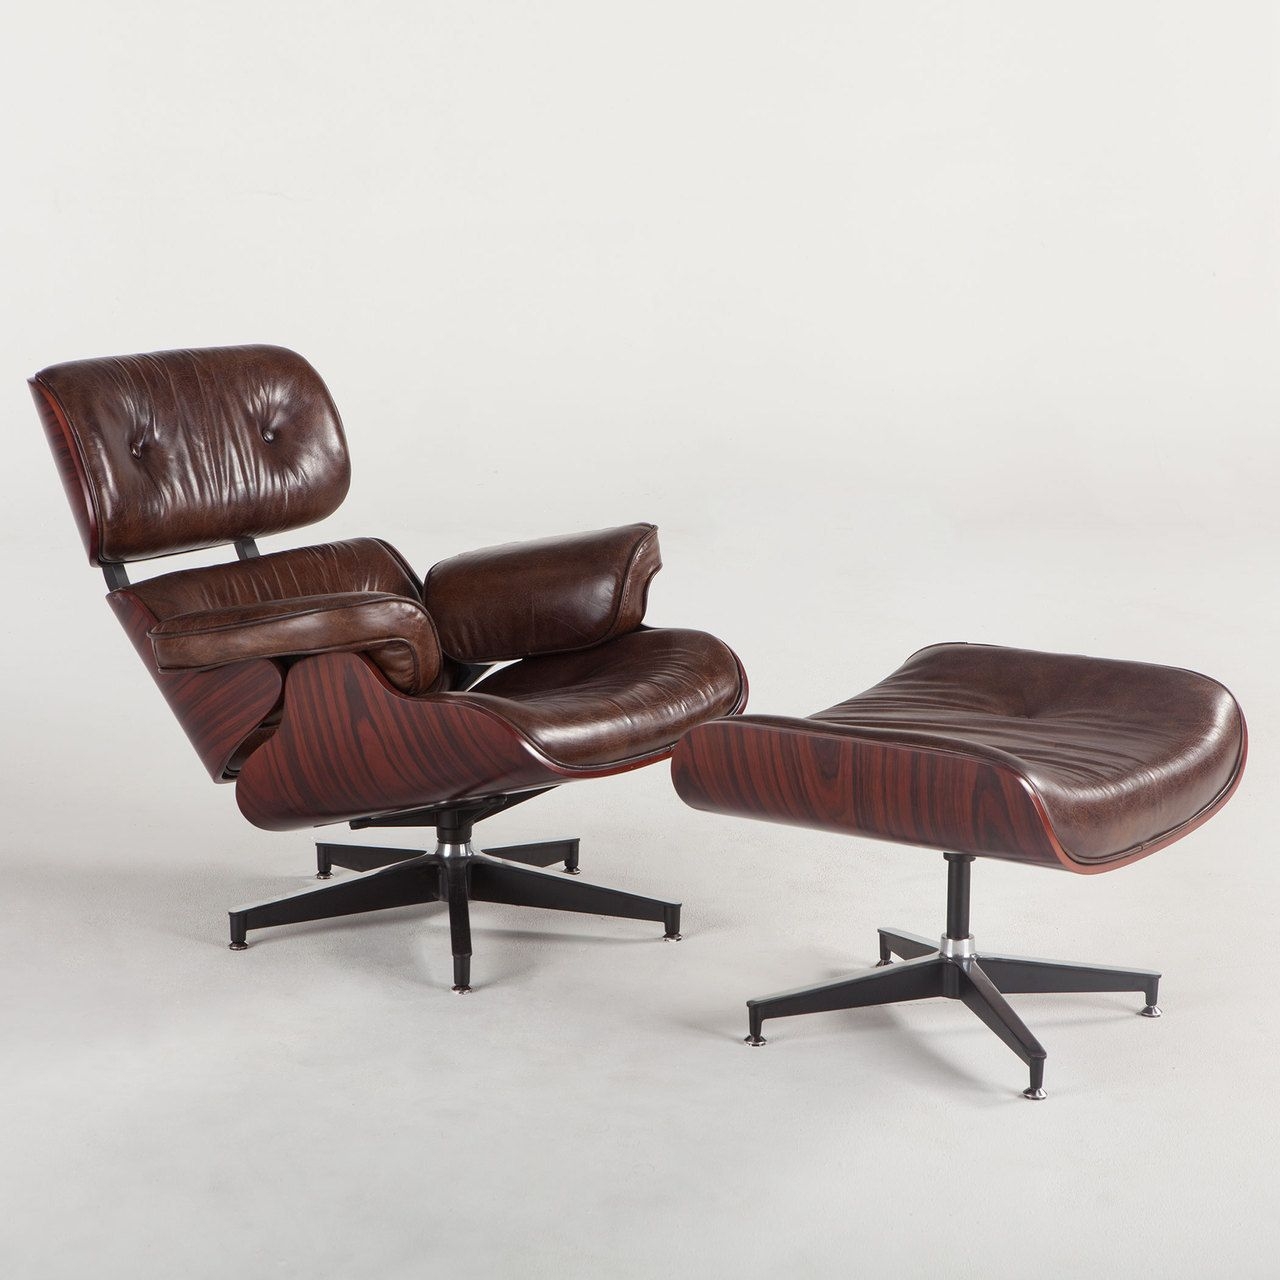 Reclining chairs with ottoman